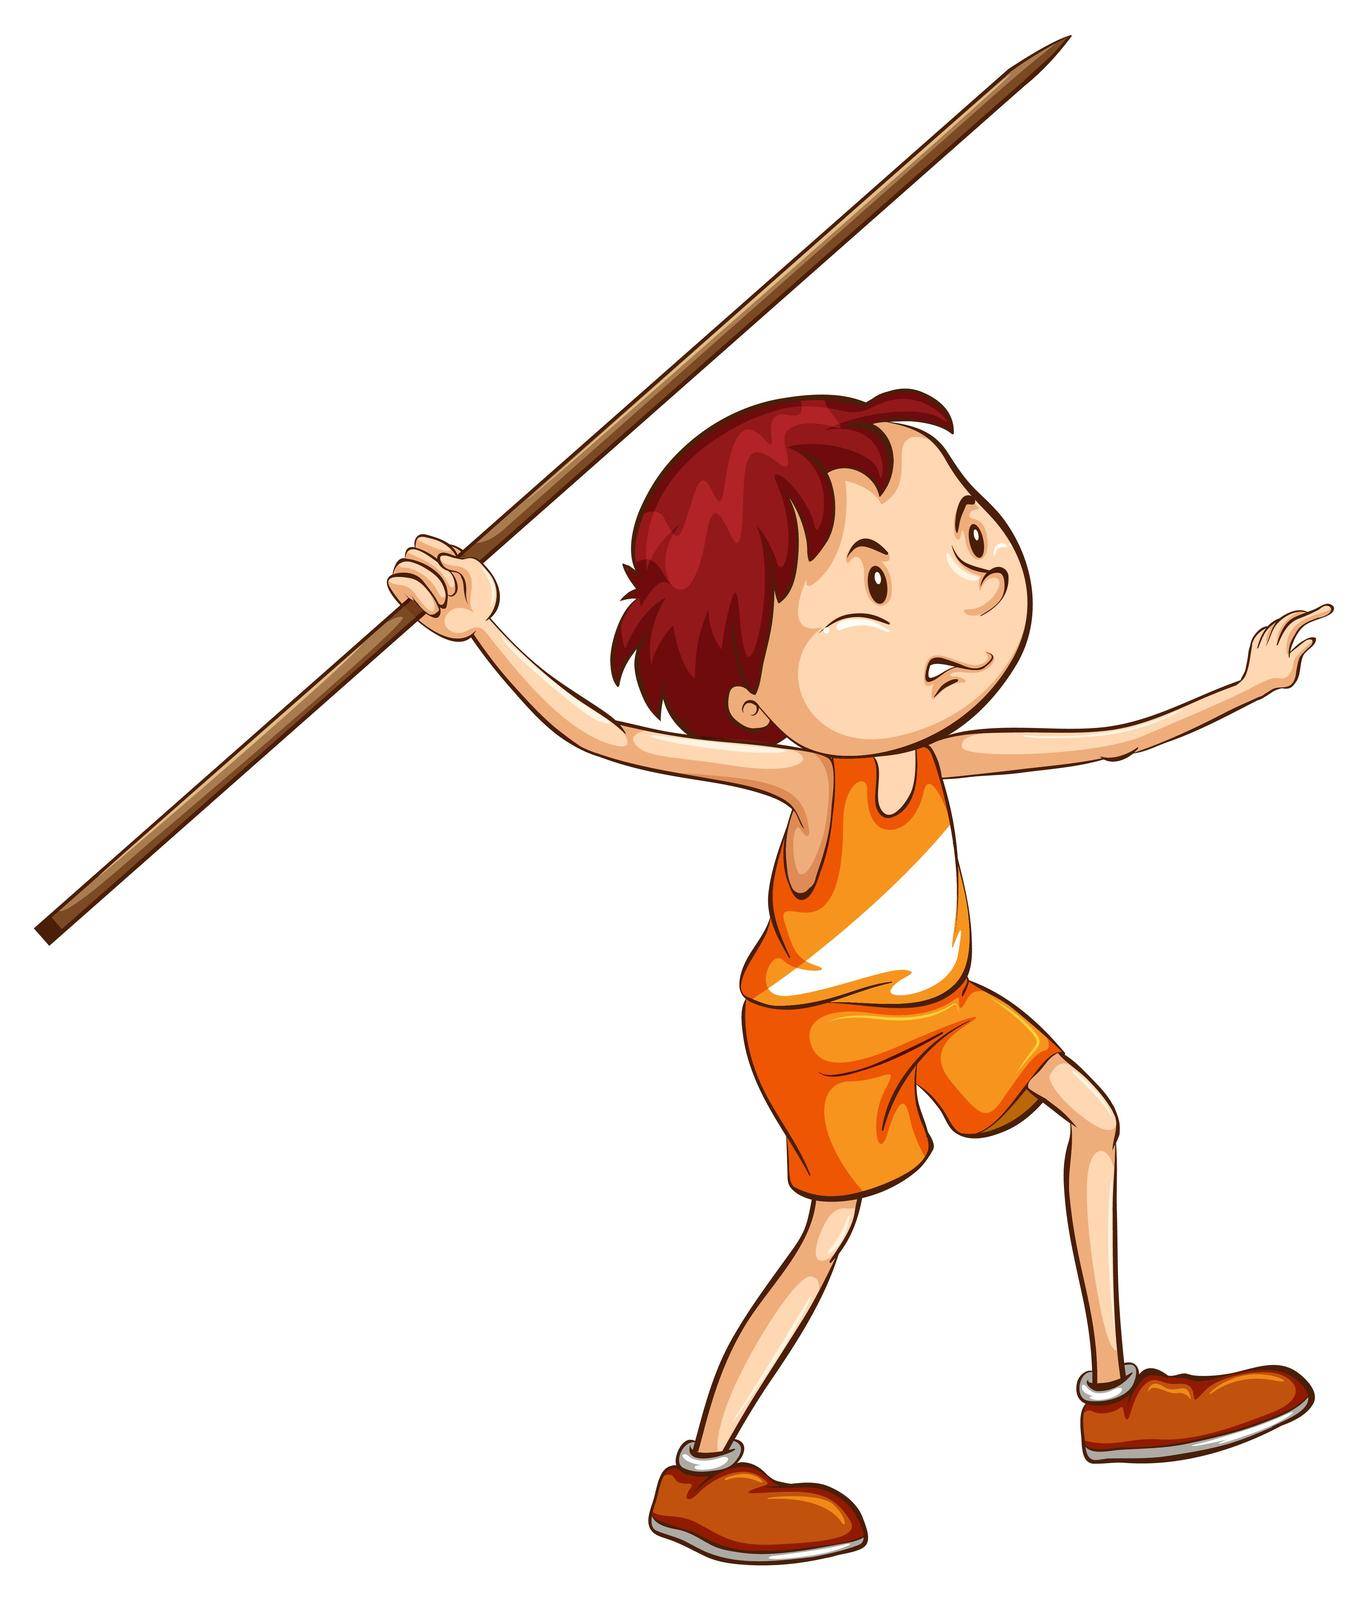 Illustration of a coloured sketch of a boy holding a stick on a white background